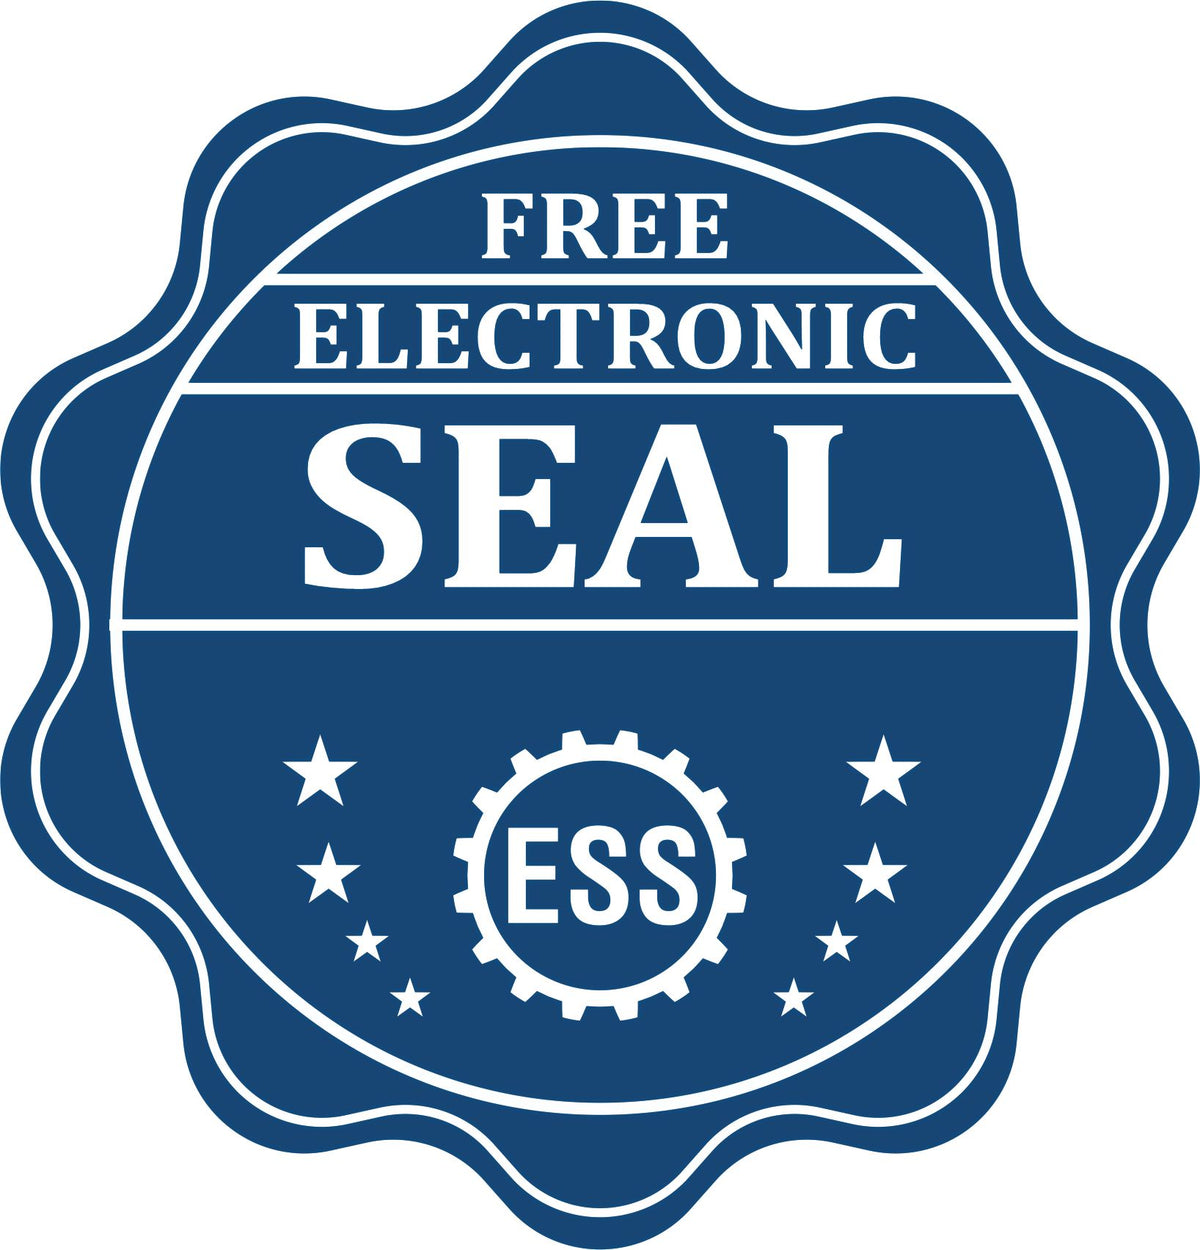 A badge showing a free electronic seal for the Self-Inking Washington Landscape Architect Stamp with stars and the ESS gear on the emblem.